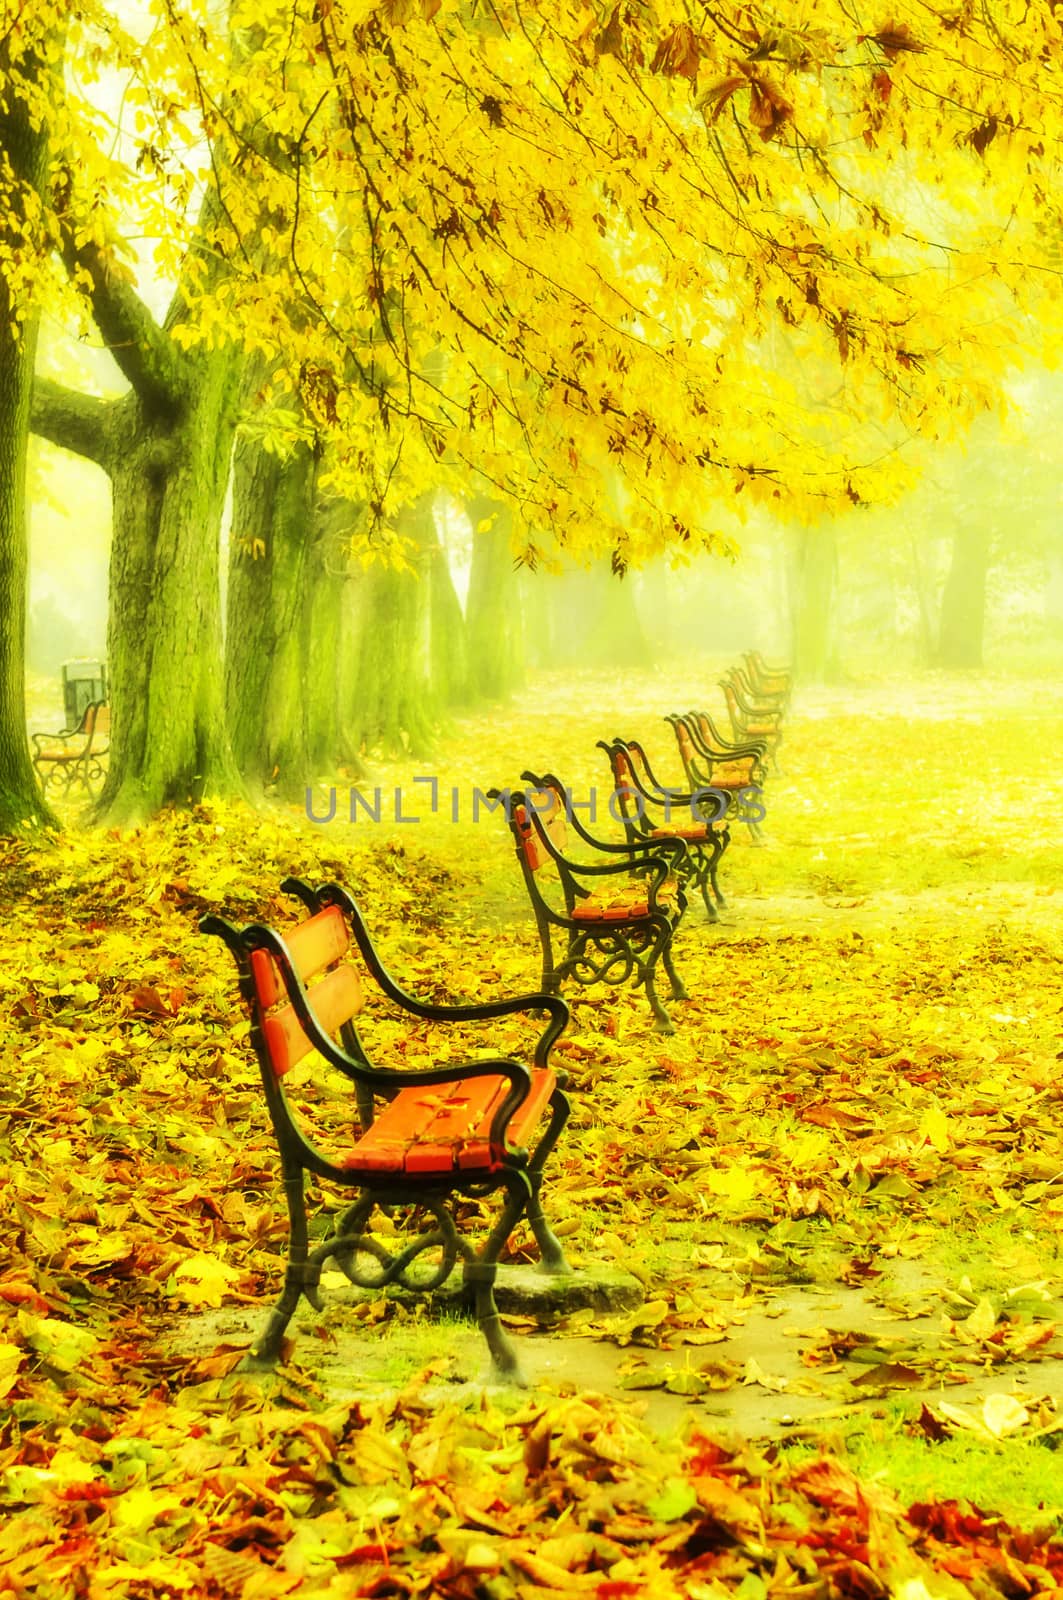 Red benches in a beautiful autumn park with fallen leaves